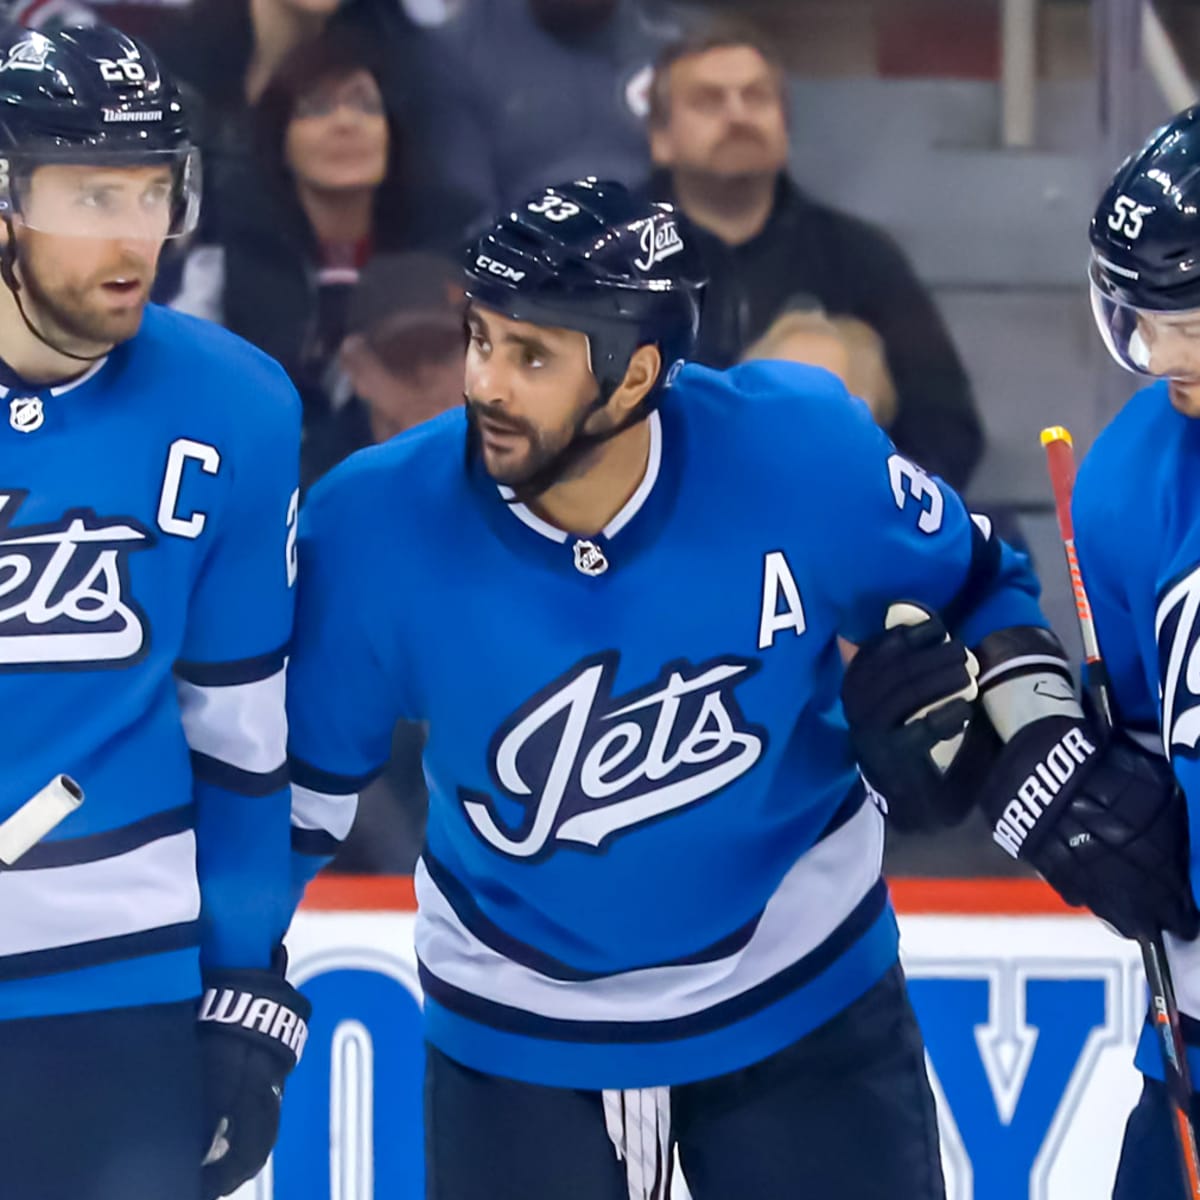 How has Dustin Byfuglien's legacy impacted the Winnipeg Jets? : r